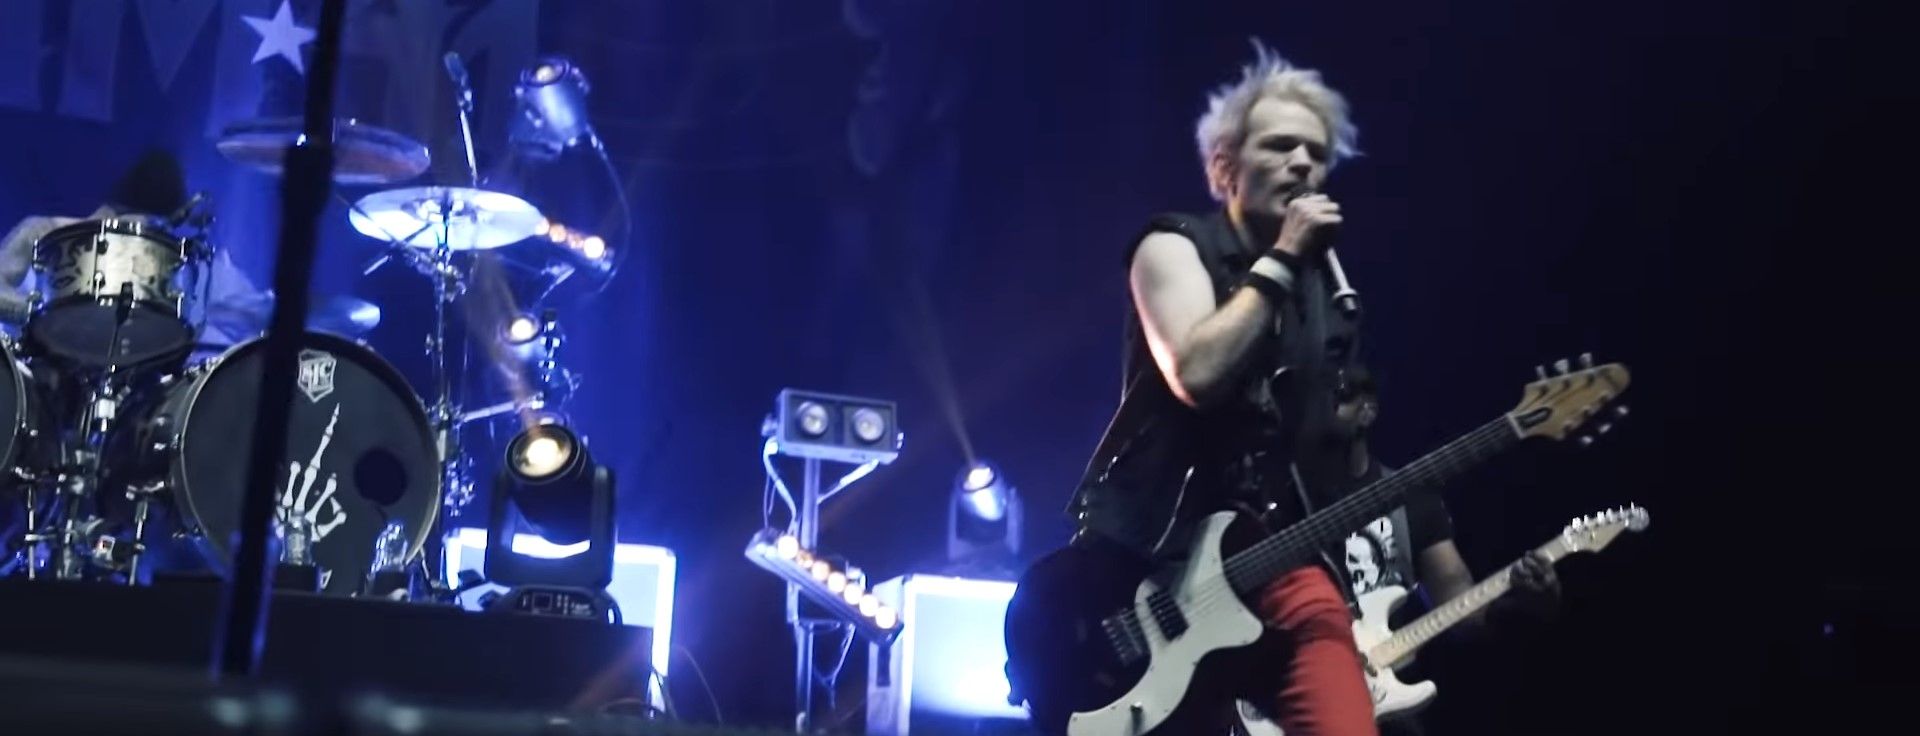 Sum 41 - Walking Disaster (Live In Laval, Canada 2019)